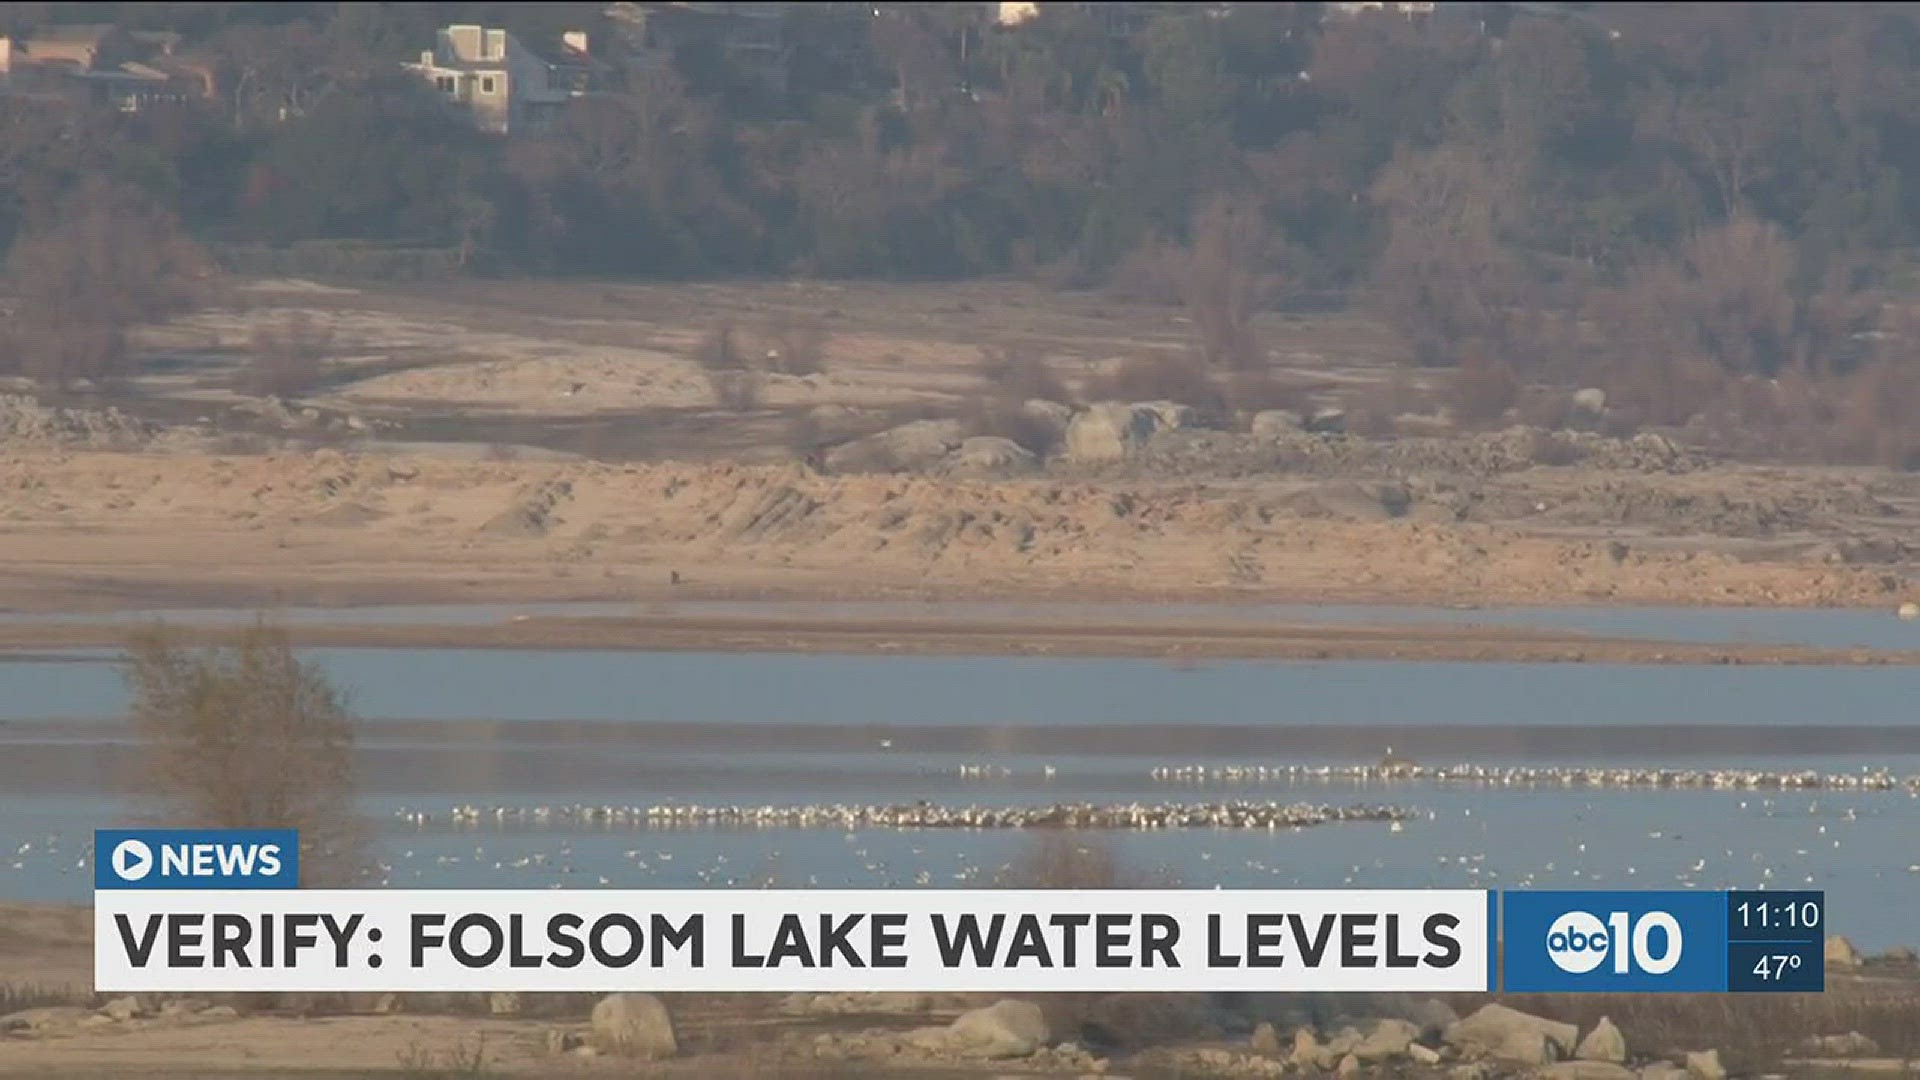 Is too much water being released from Folsom Lake? (Dec. 22, 2016)